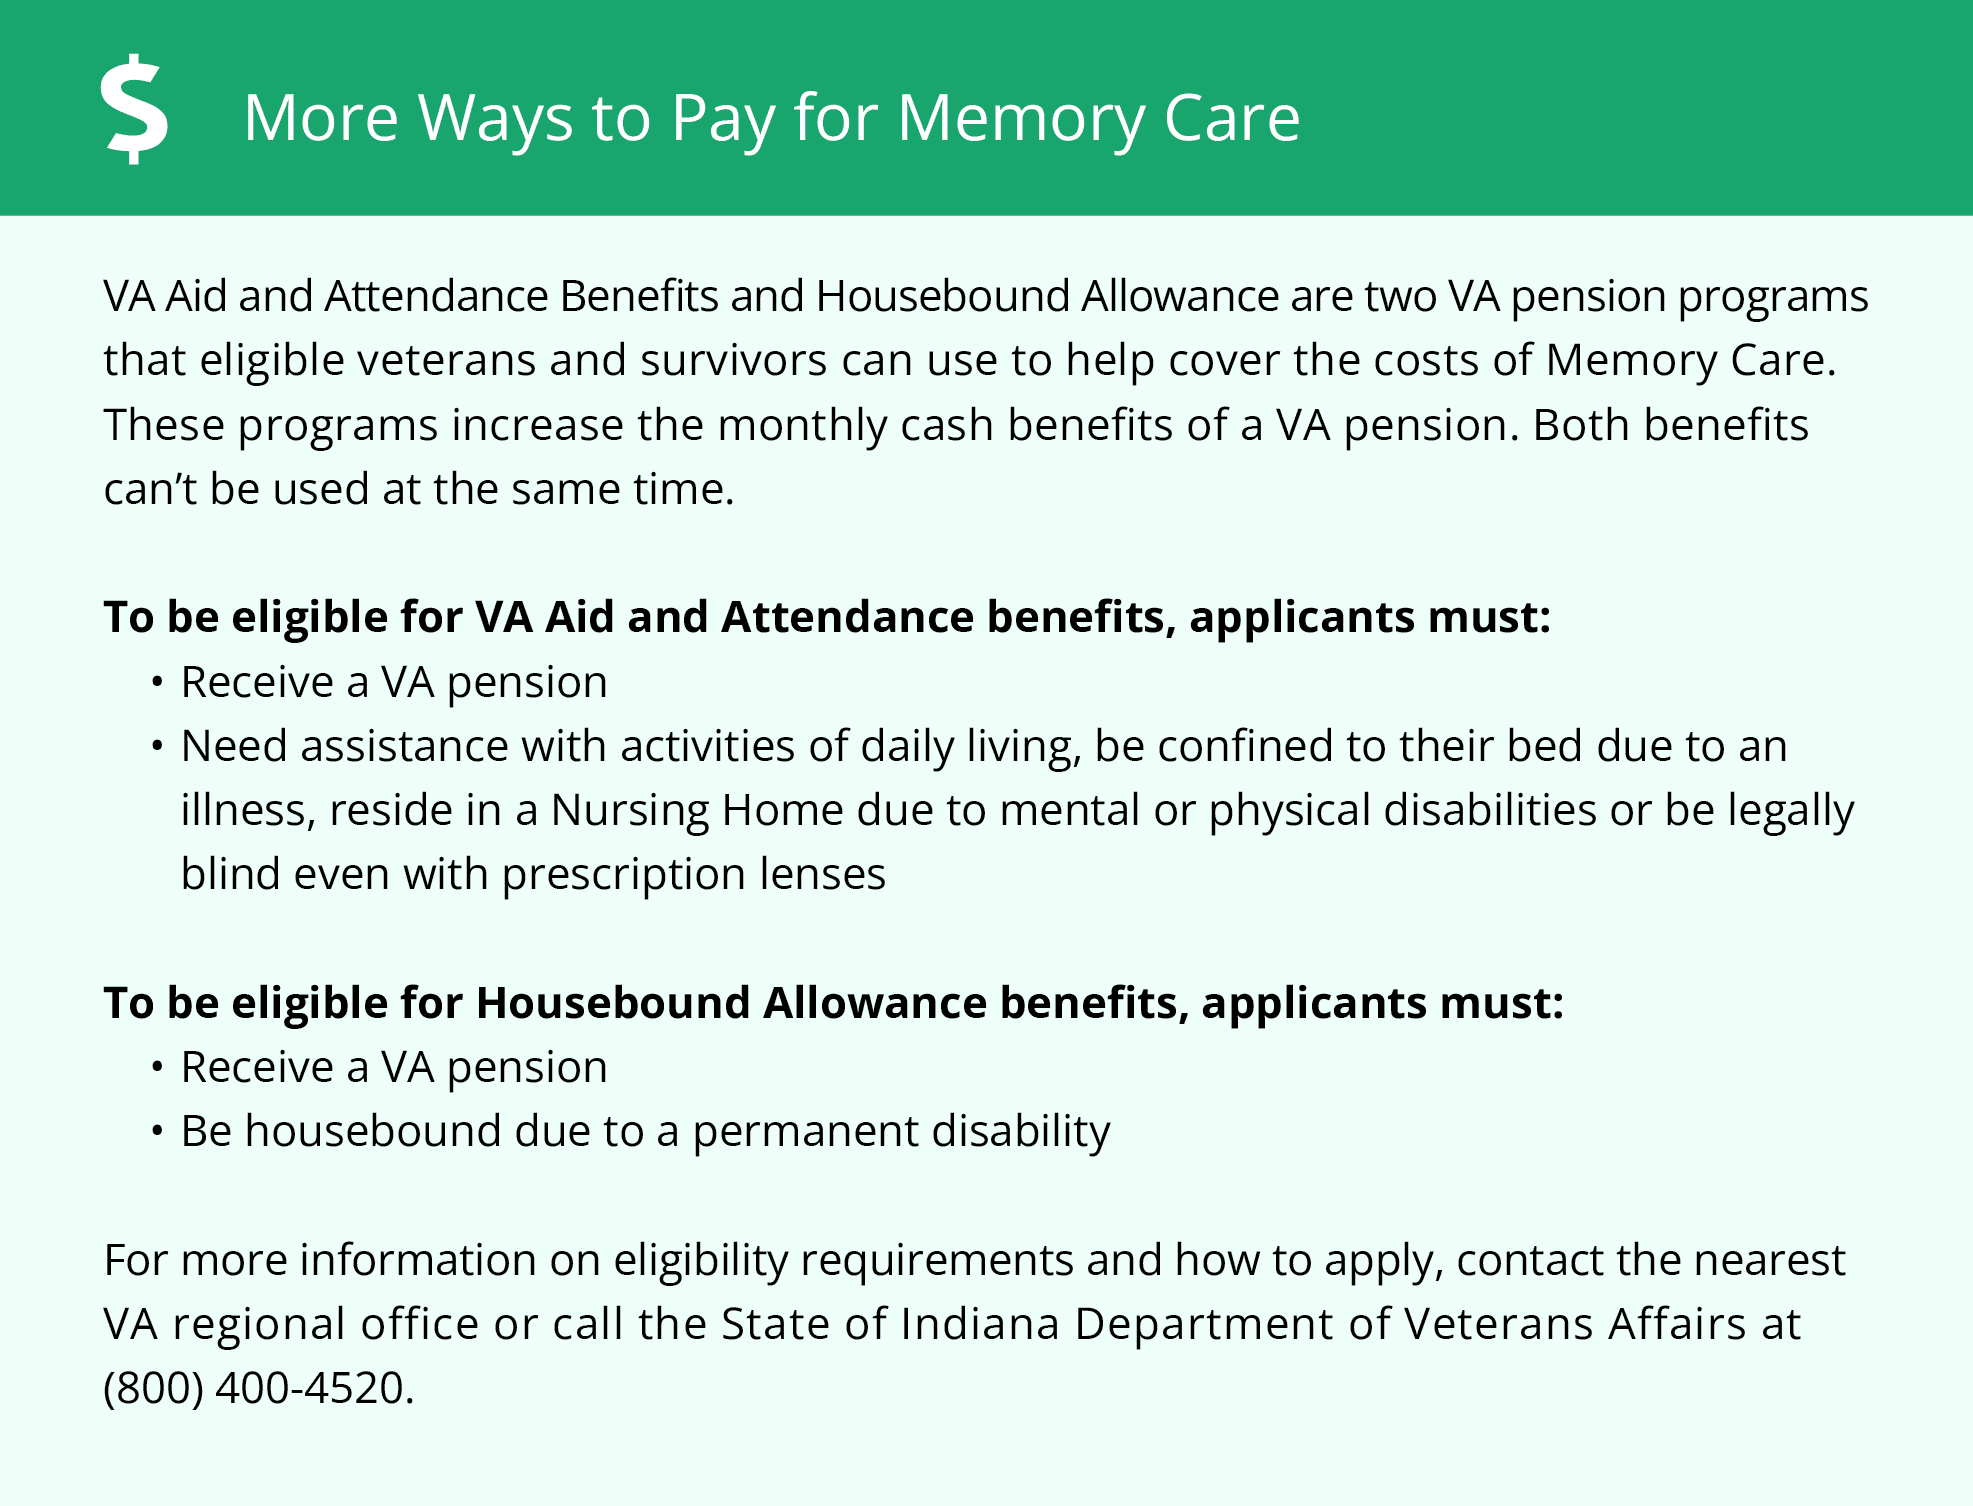 Financial Assistance for Memory Care in Indiana